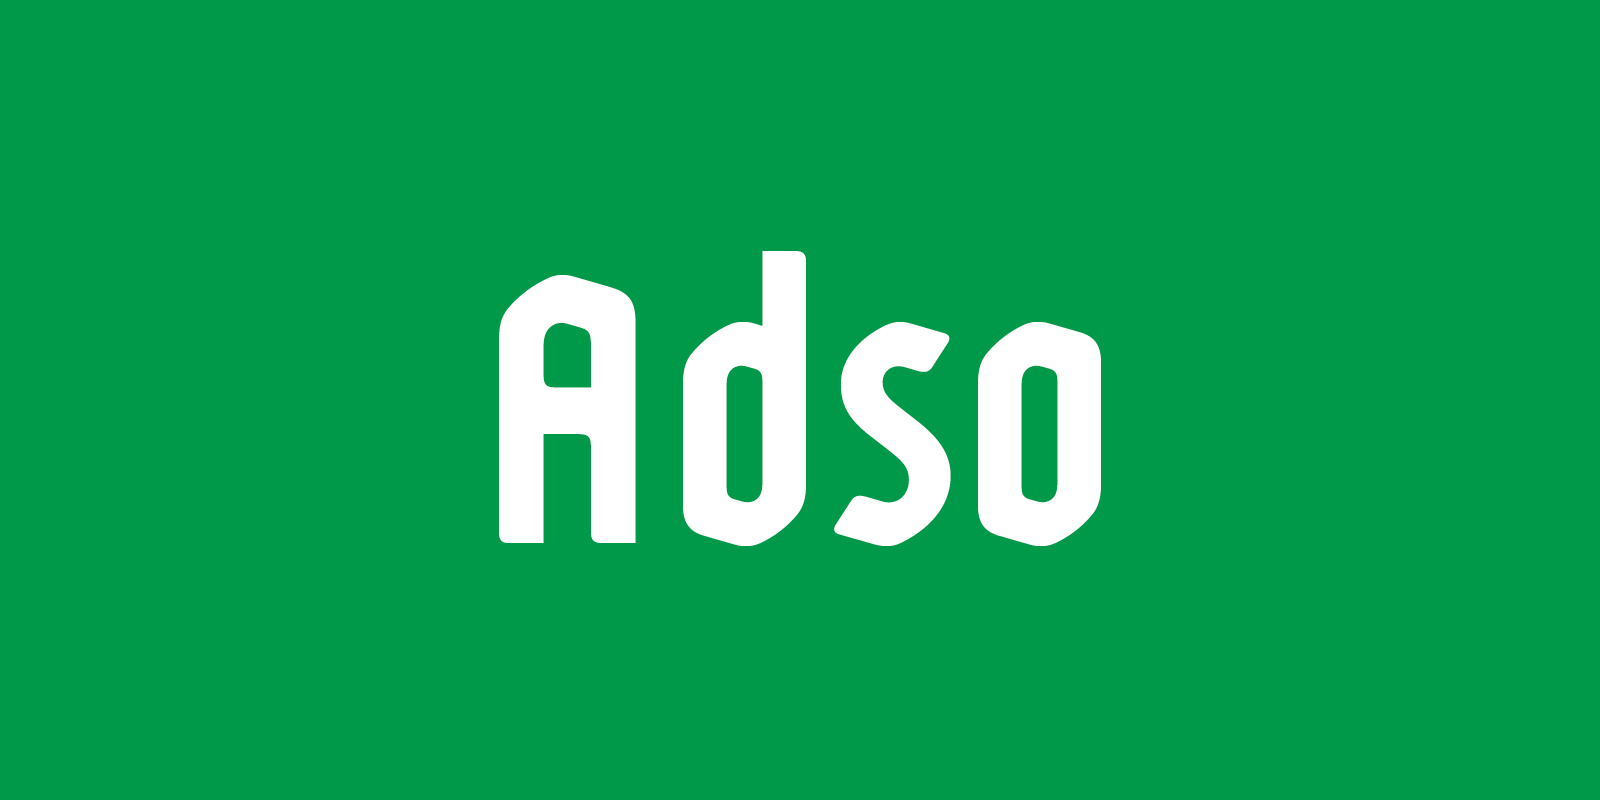 Card displaying Adso typeface in various styles